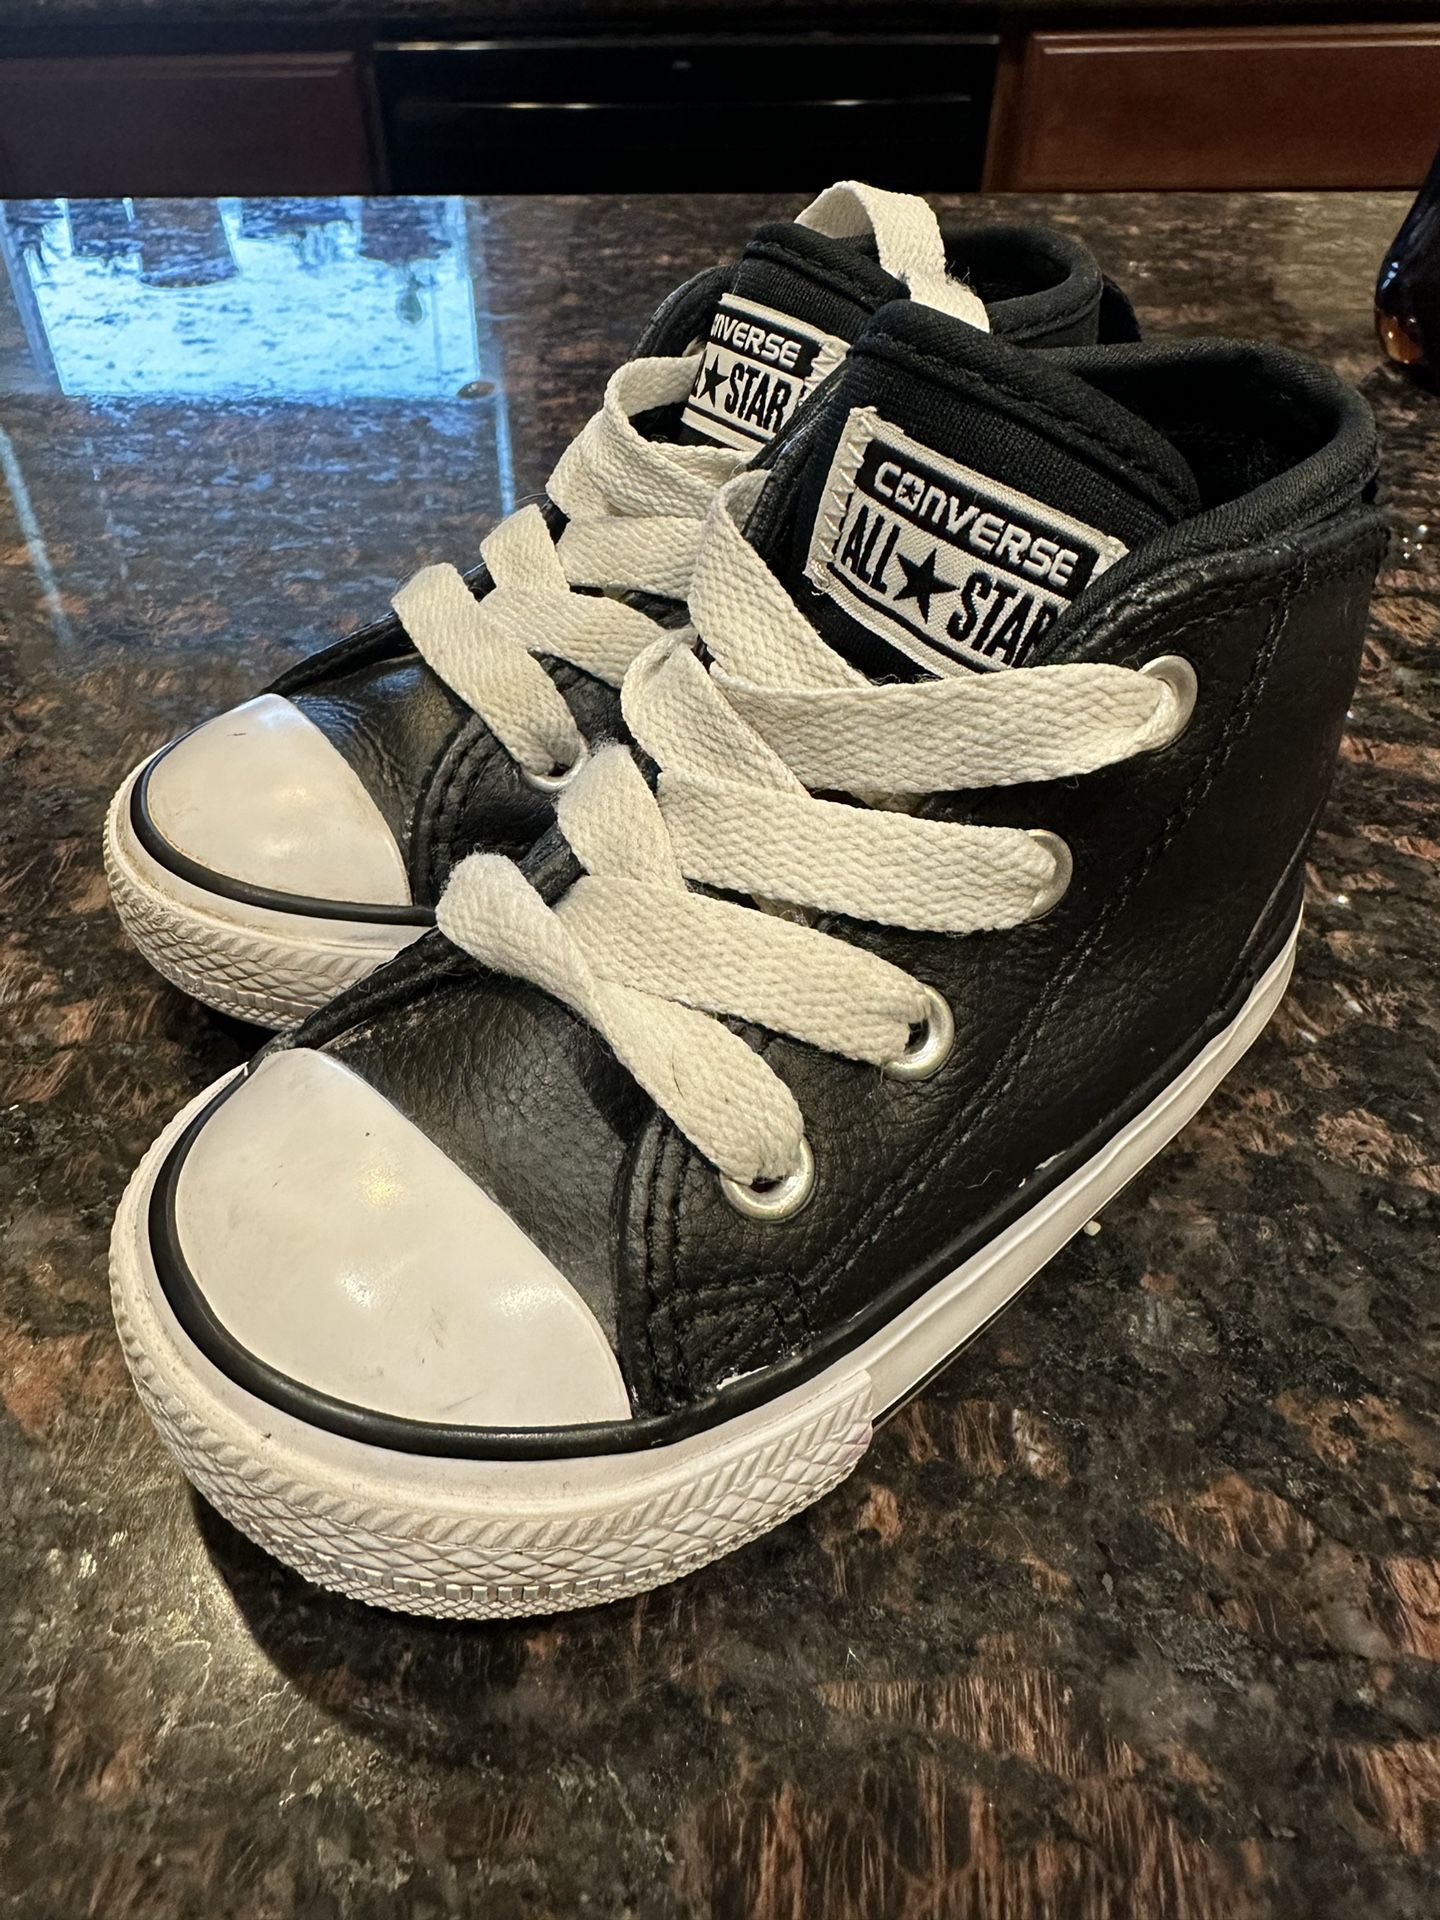 Toddler Infant Converse Sneakers Mid Top All Stars Black Size 6 GREAT SHAPE 